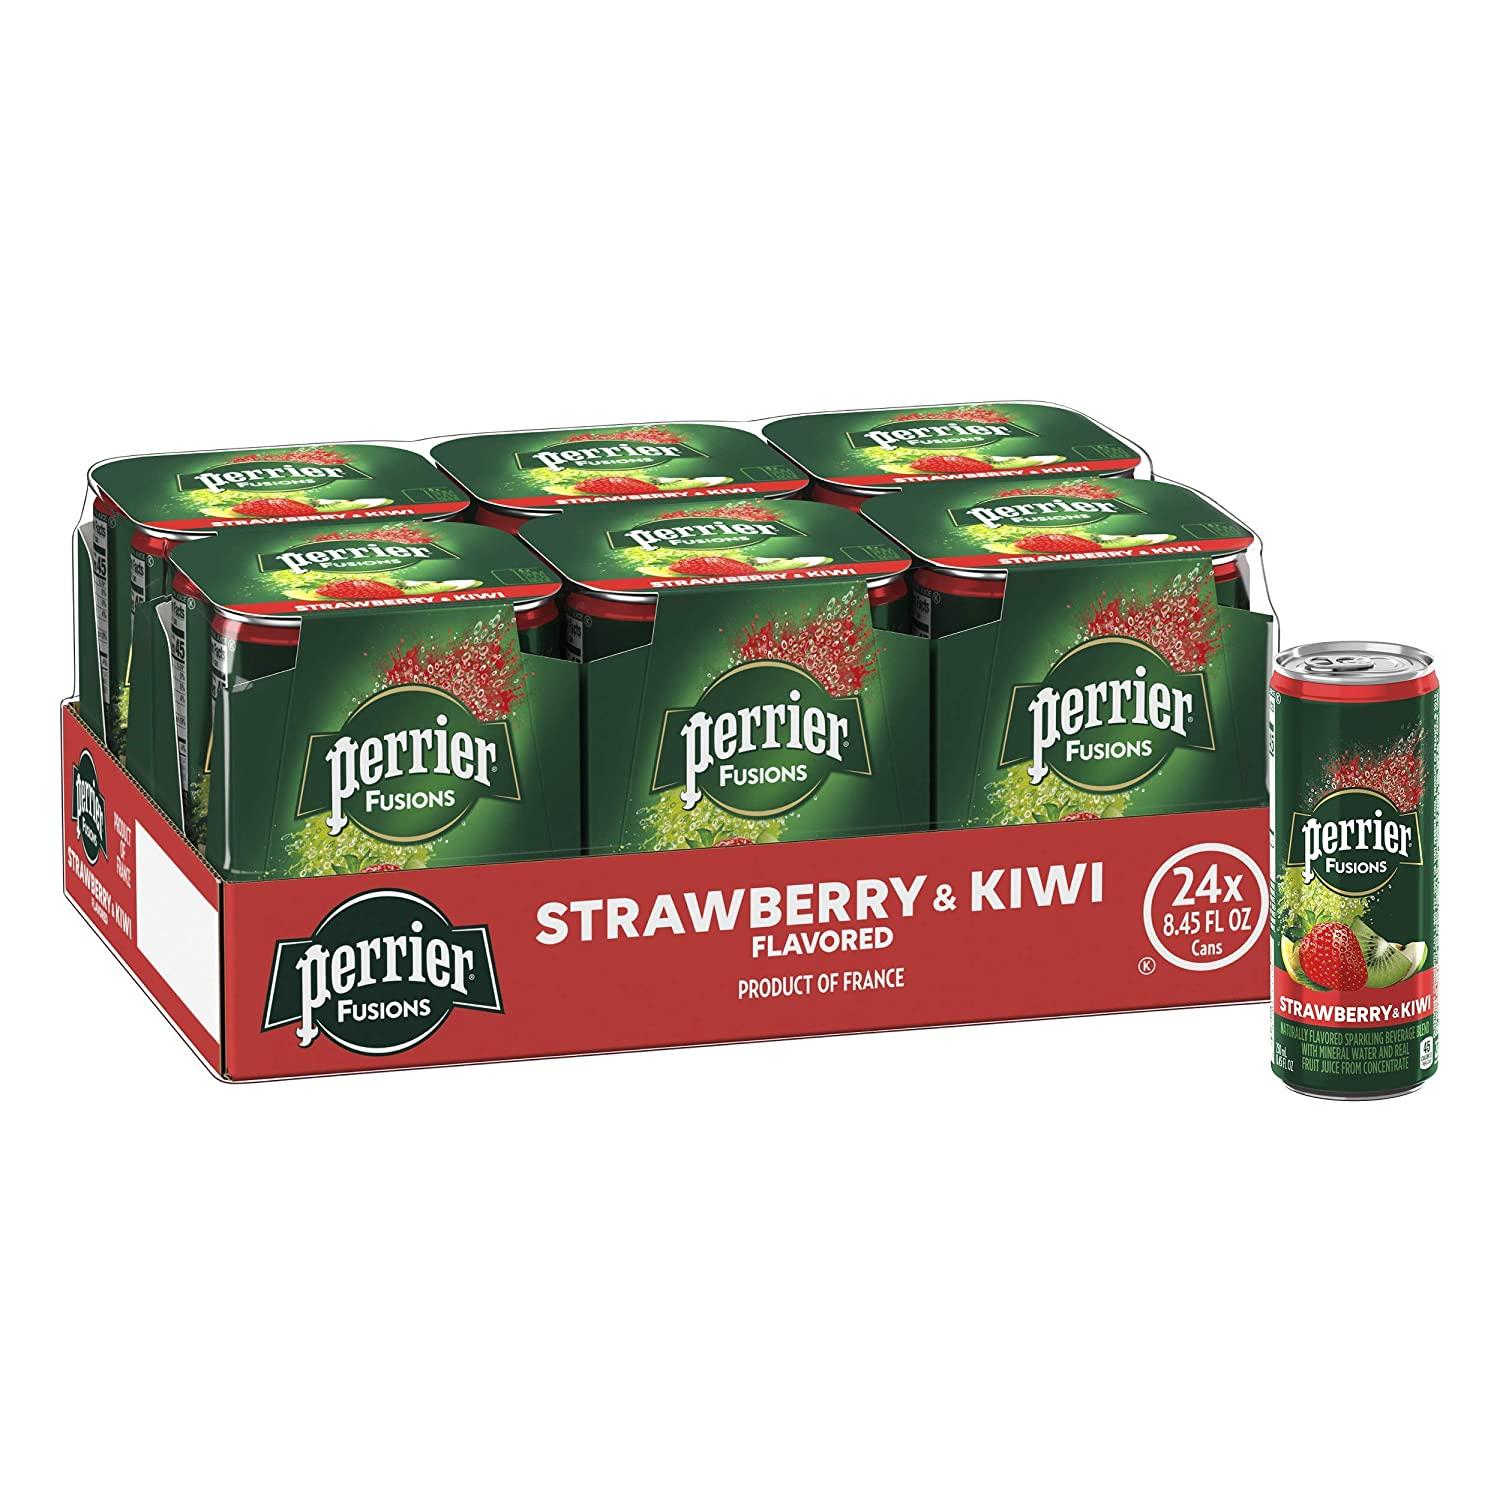 24 Perrier Fusions Strawberry and Kiwi Flavor for $10.88 Shipped